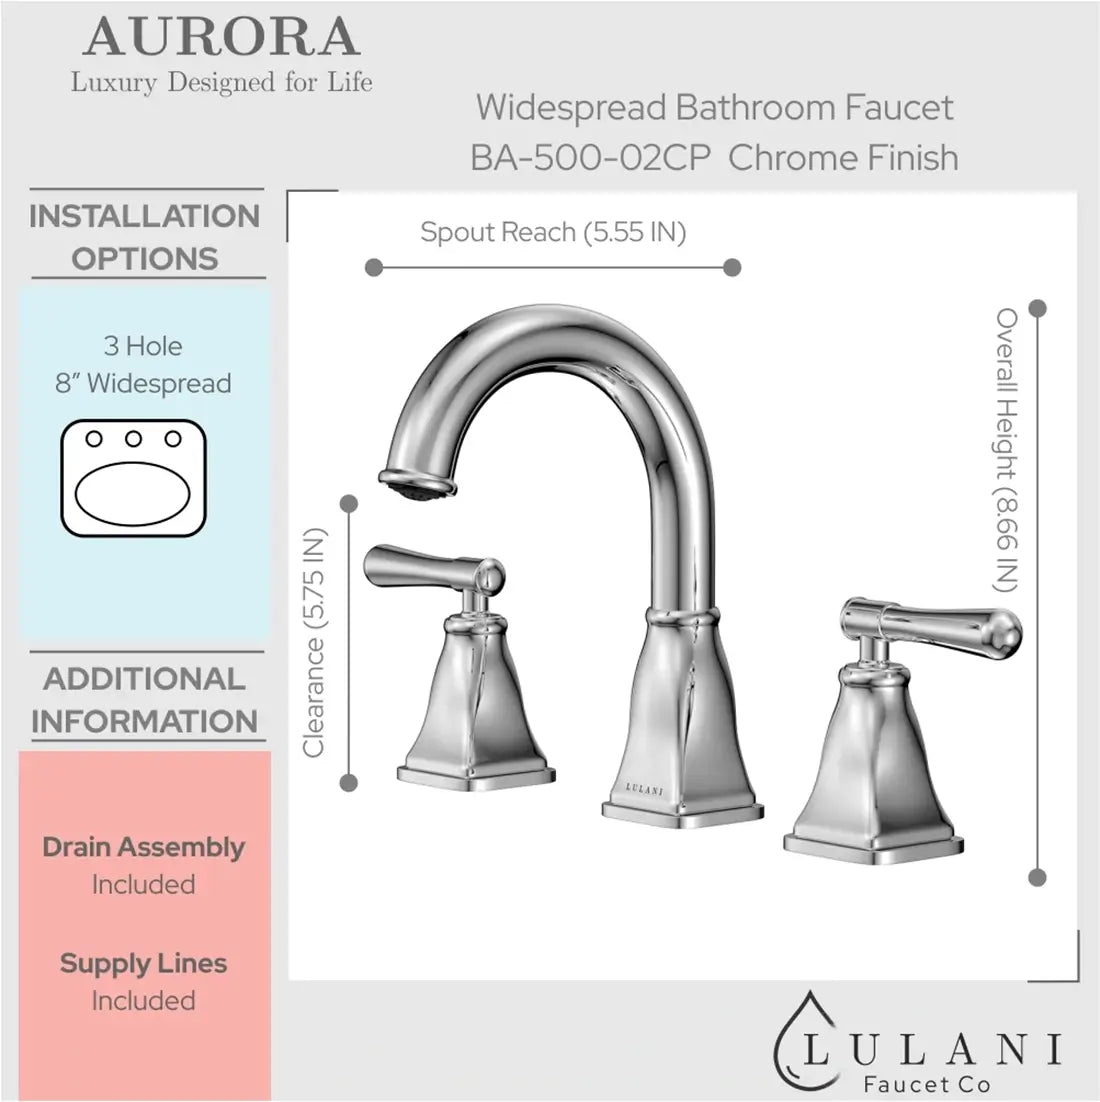 Lulani Aurora Chrome 1.2 GPM Double Handle Widespread Brass Faucet With Drain Assembly